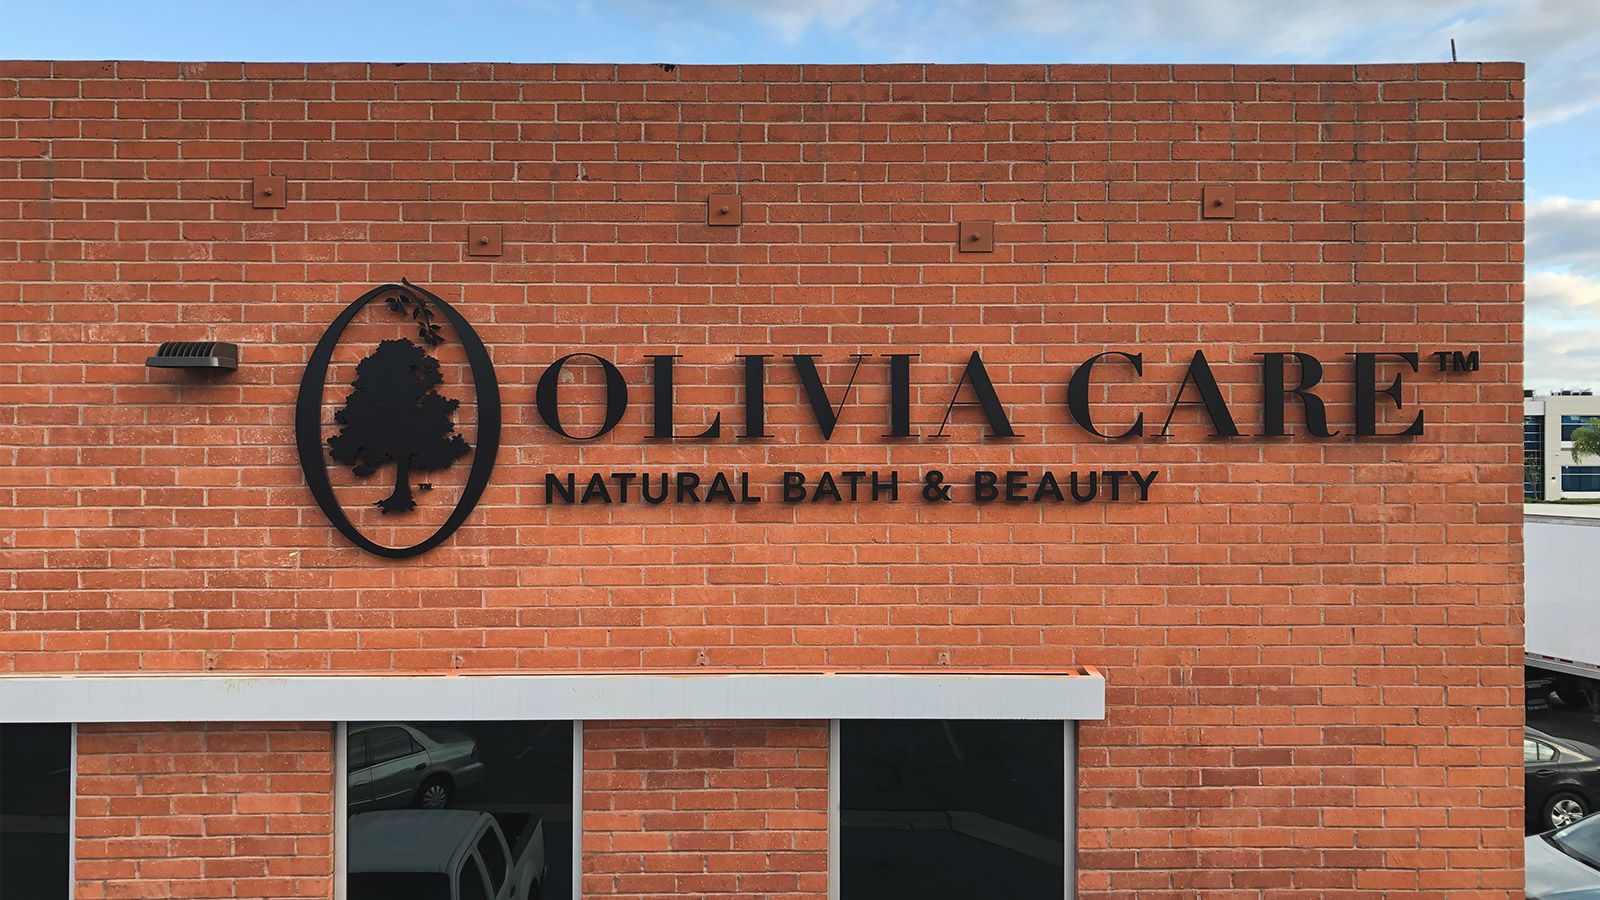 olivia care acrylic 3d letters